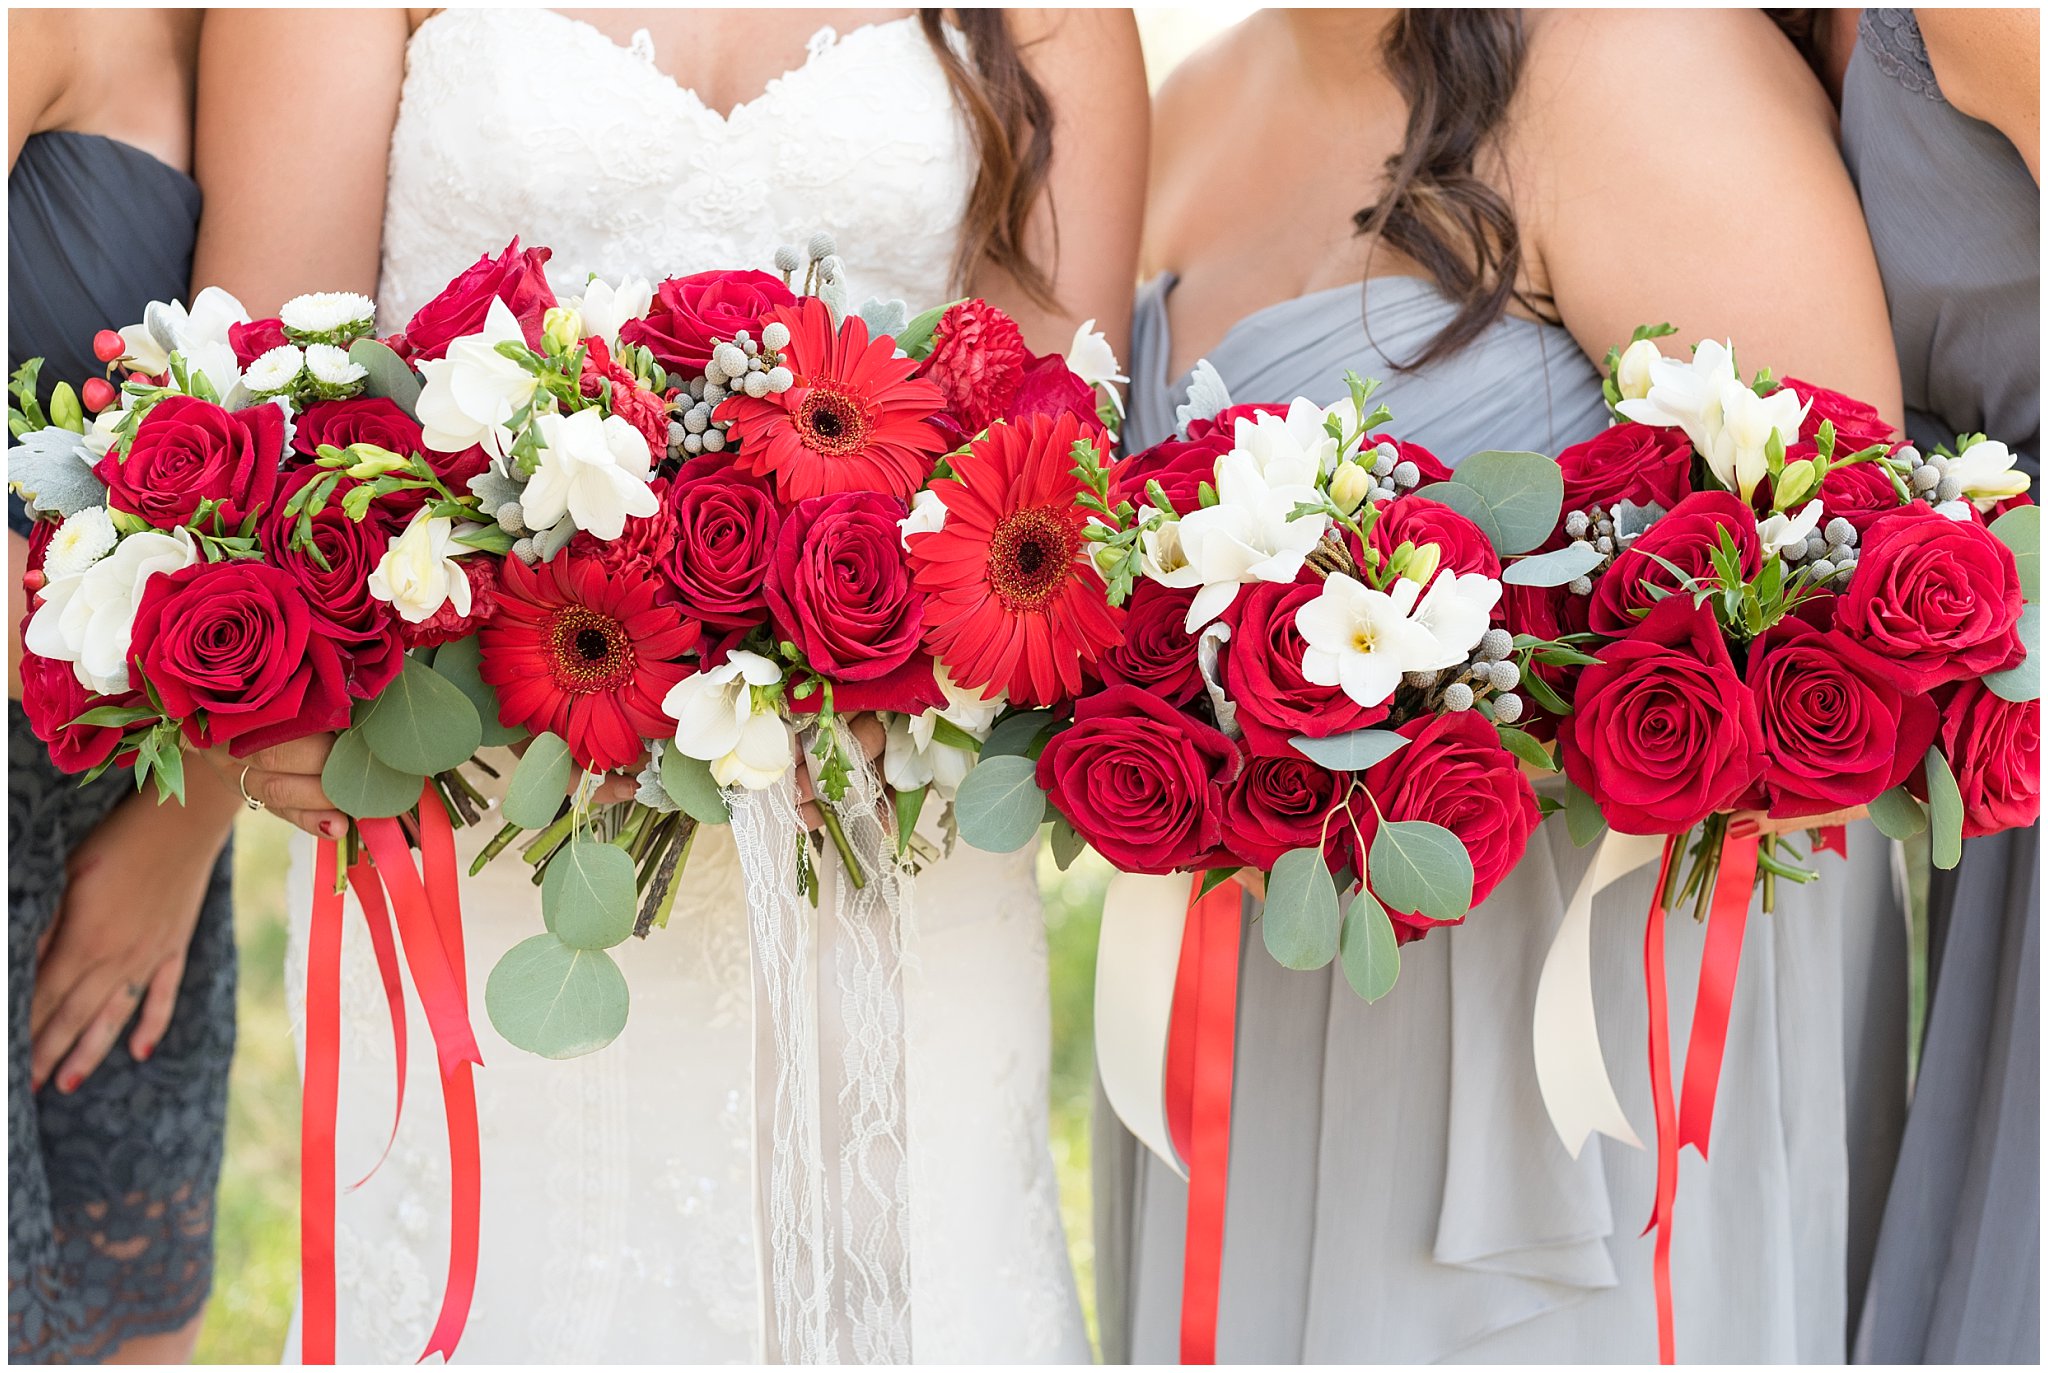 Dancing Daisies Floral | Detail and close up line of bride and bridesmaid's red and white wedding bouquets | Davis County Outdoor Wedding | Jessie and Dallin Photography